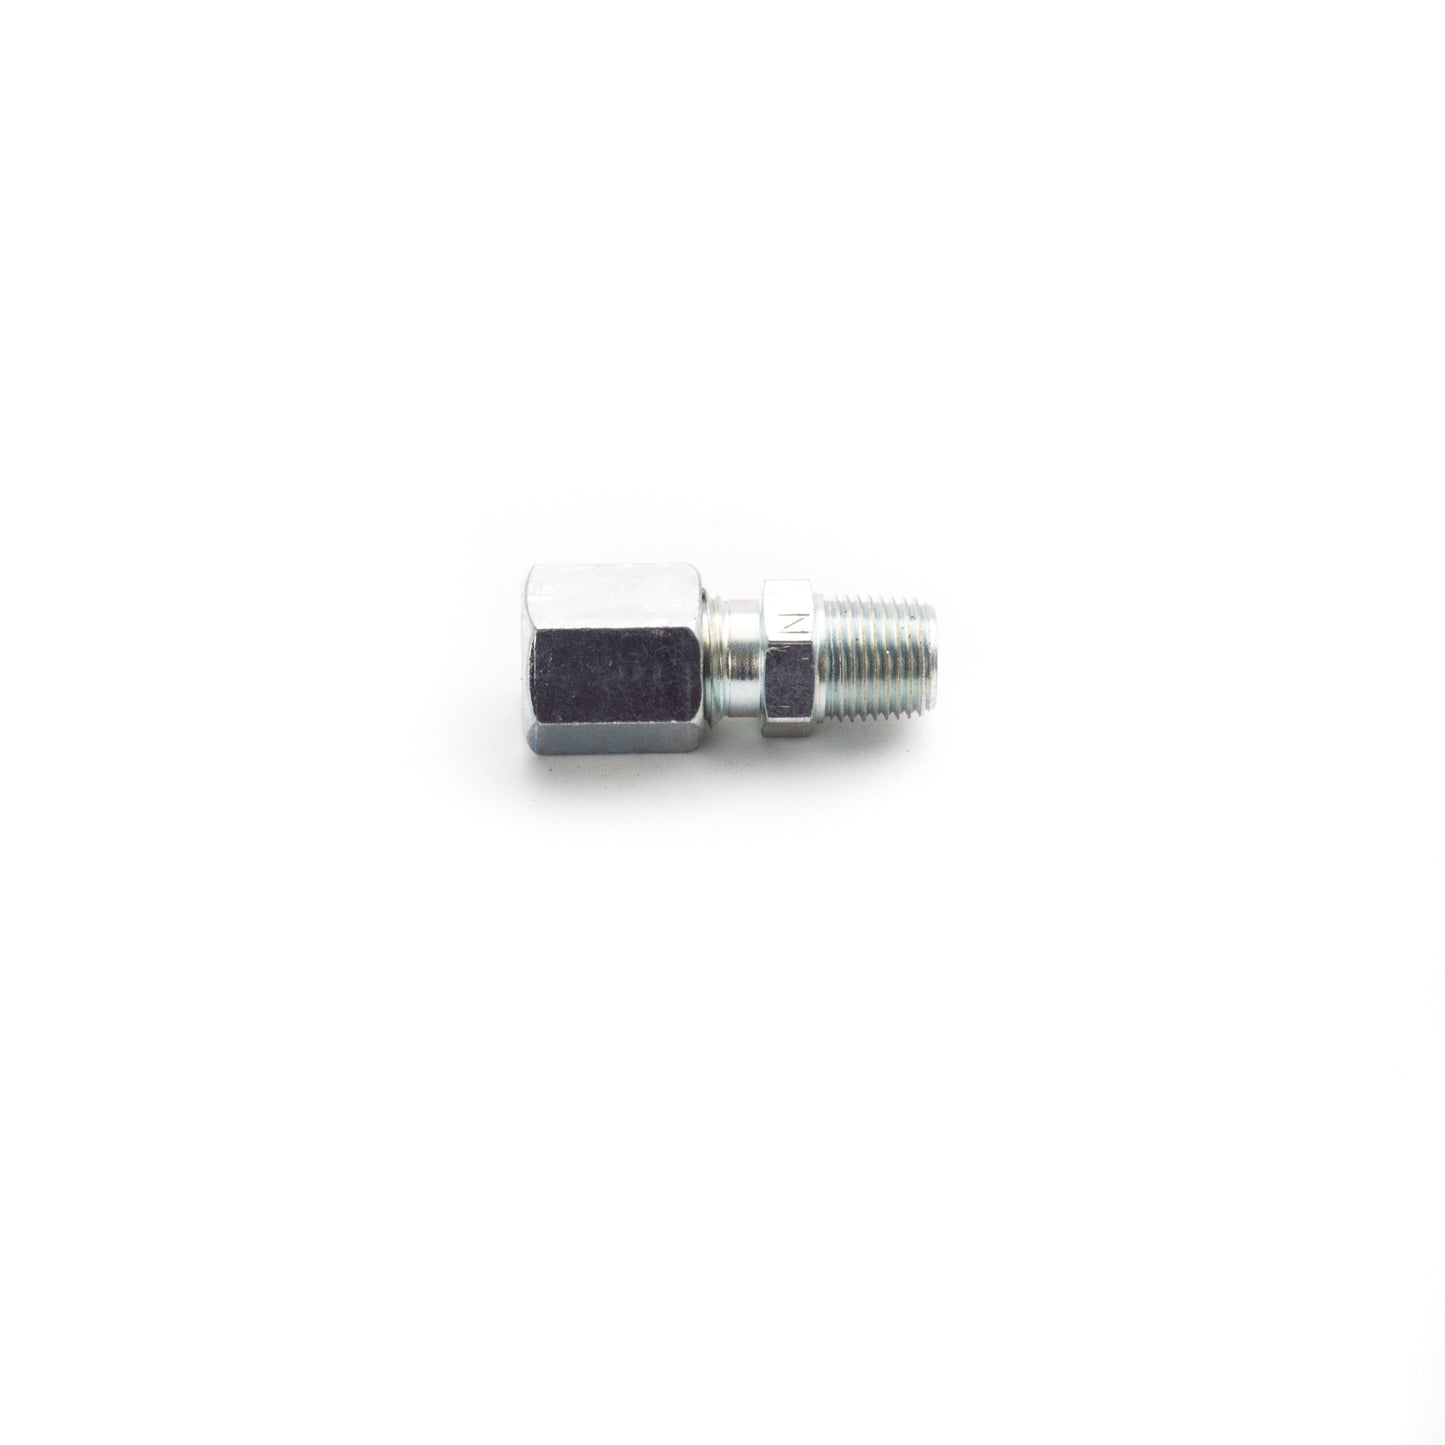 1/8 NPT 6mm Compression Fitting for 6mm EGT Probe